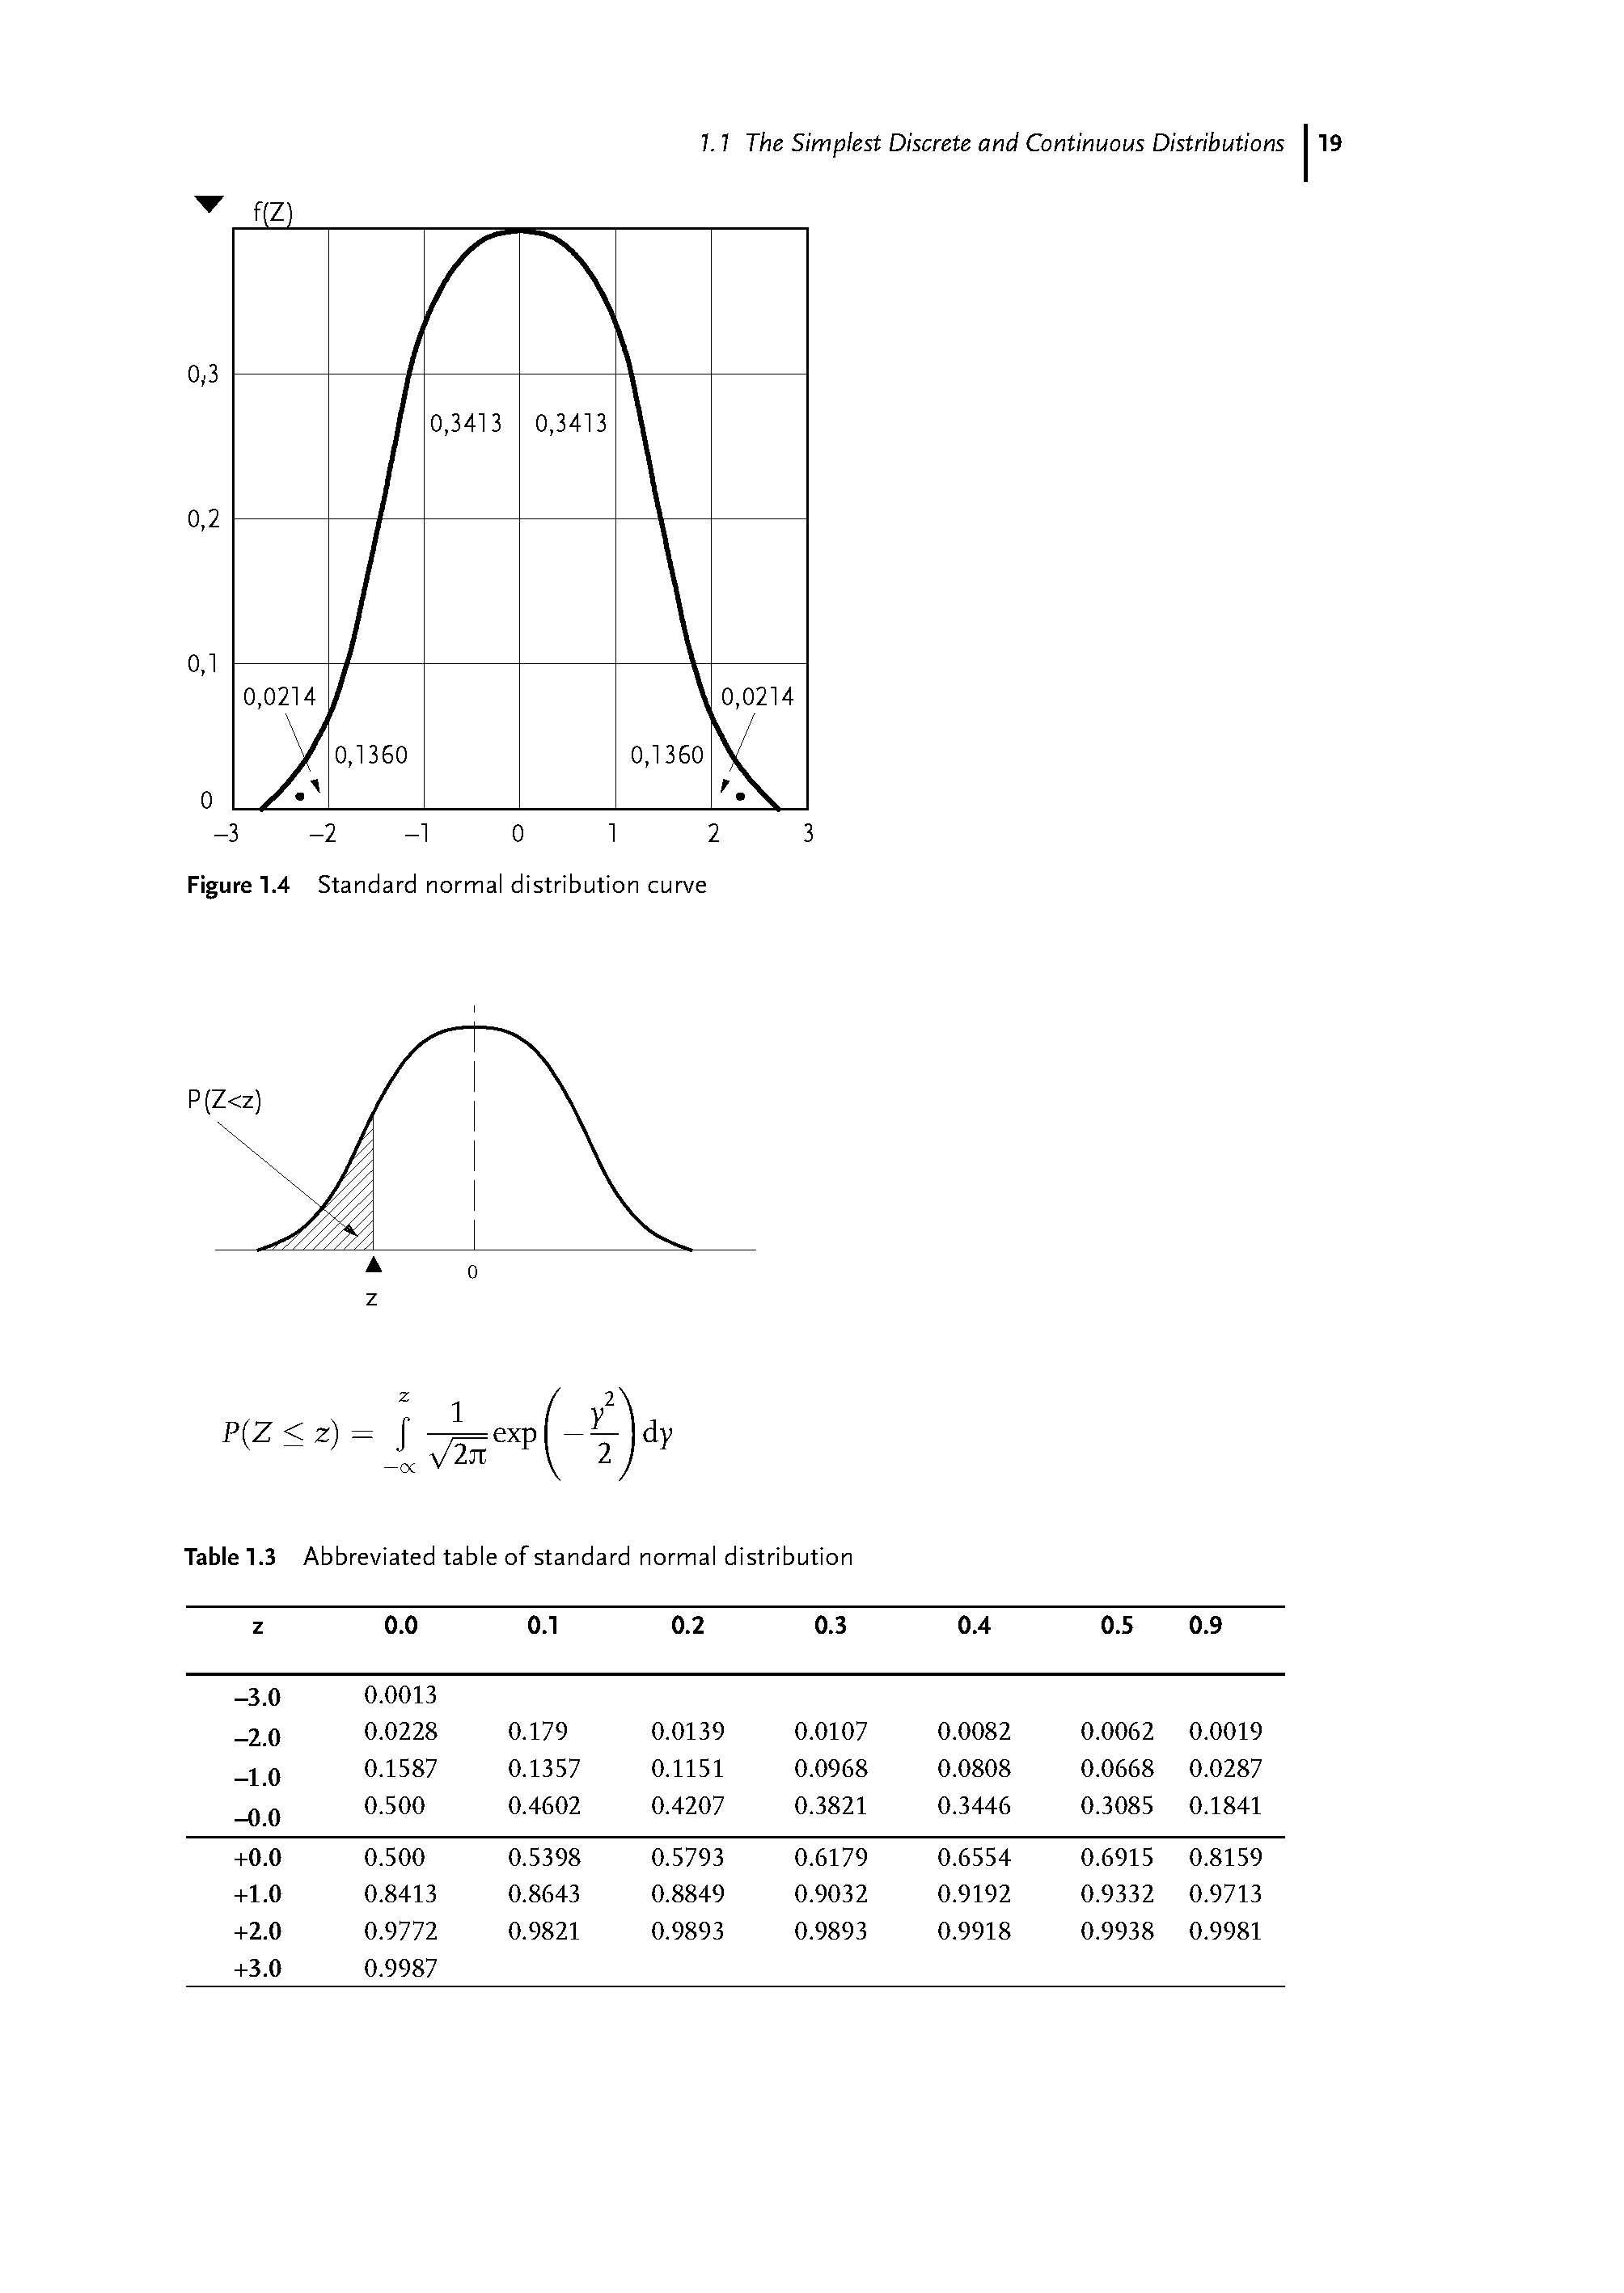 Table 1.3 Abbreviated table of standard normal distribution...